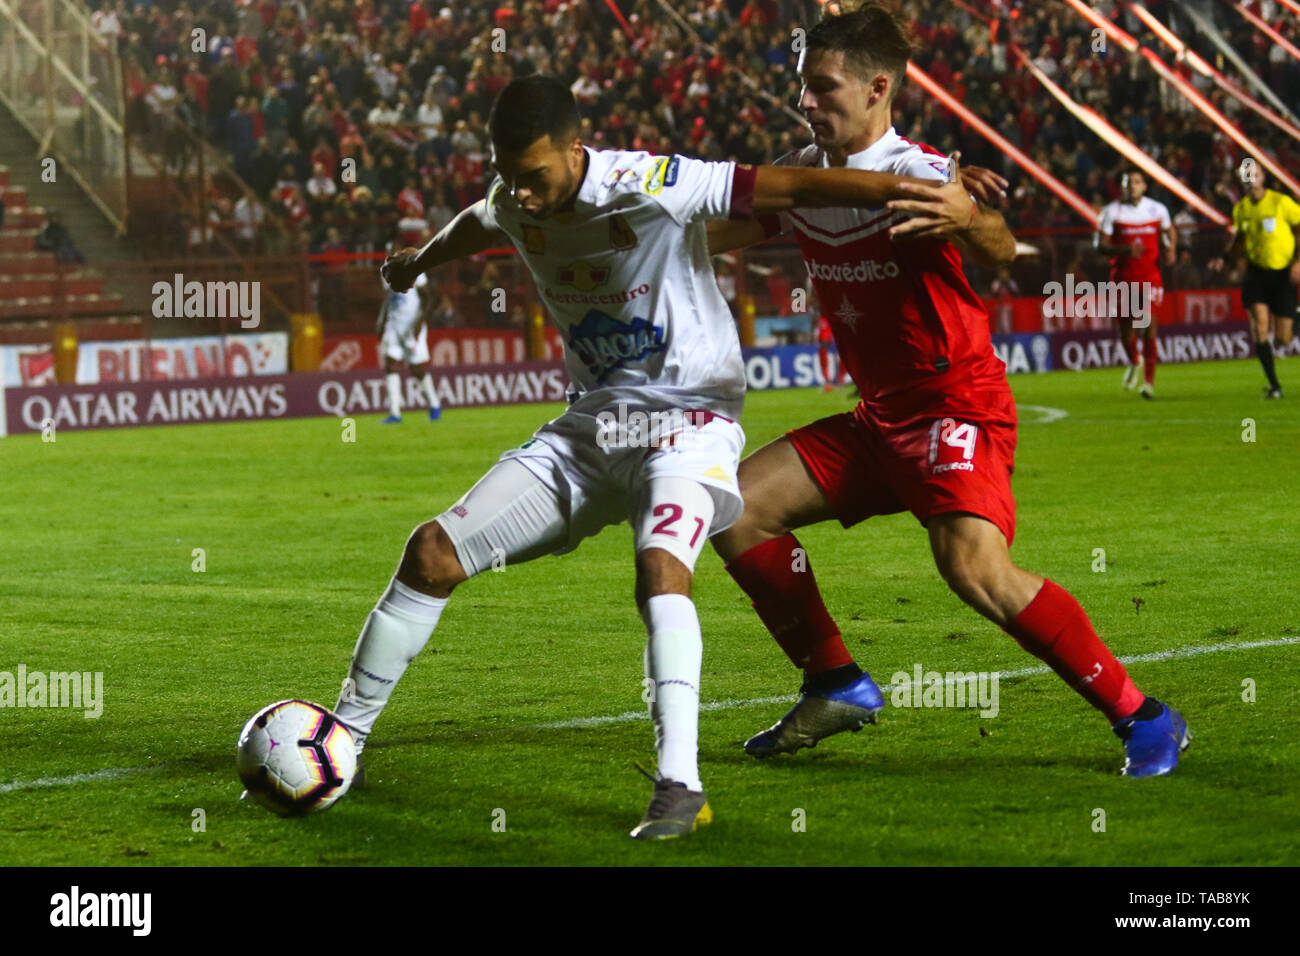 BUENOS AIRES, 23.05.2019: Juan Arboleda during the match between Argentinos Juniors and Deportes Tolima for the 2nd round of Conmebol Sudamericana Cup Stock Photo